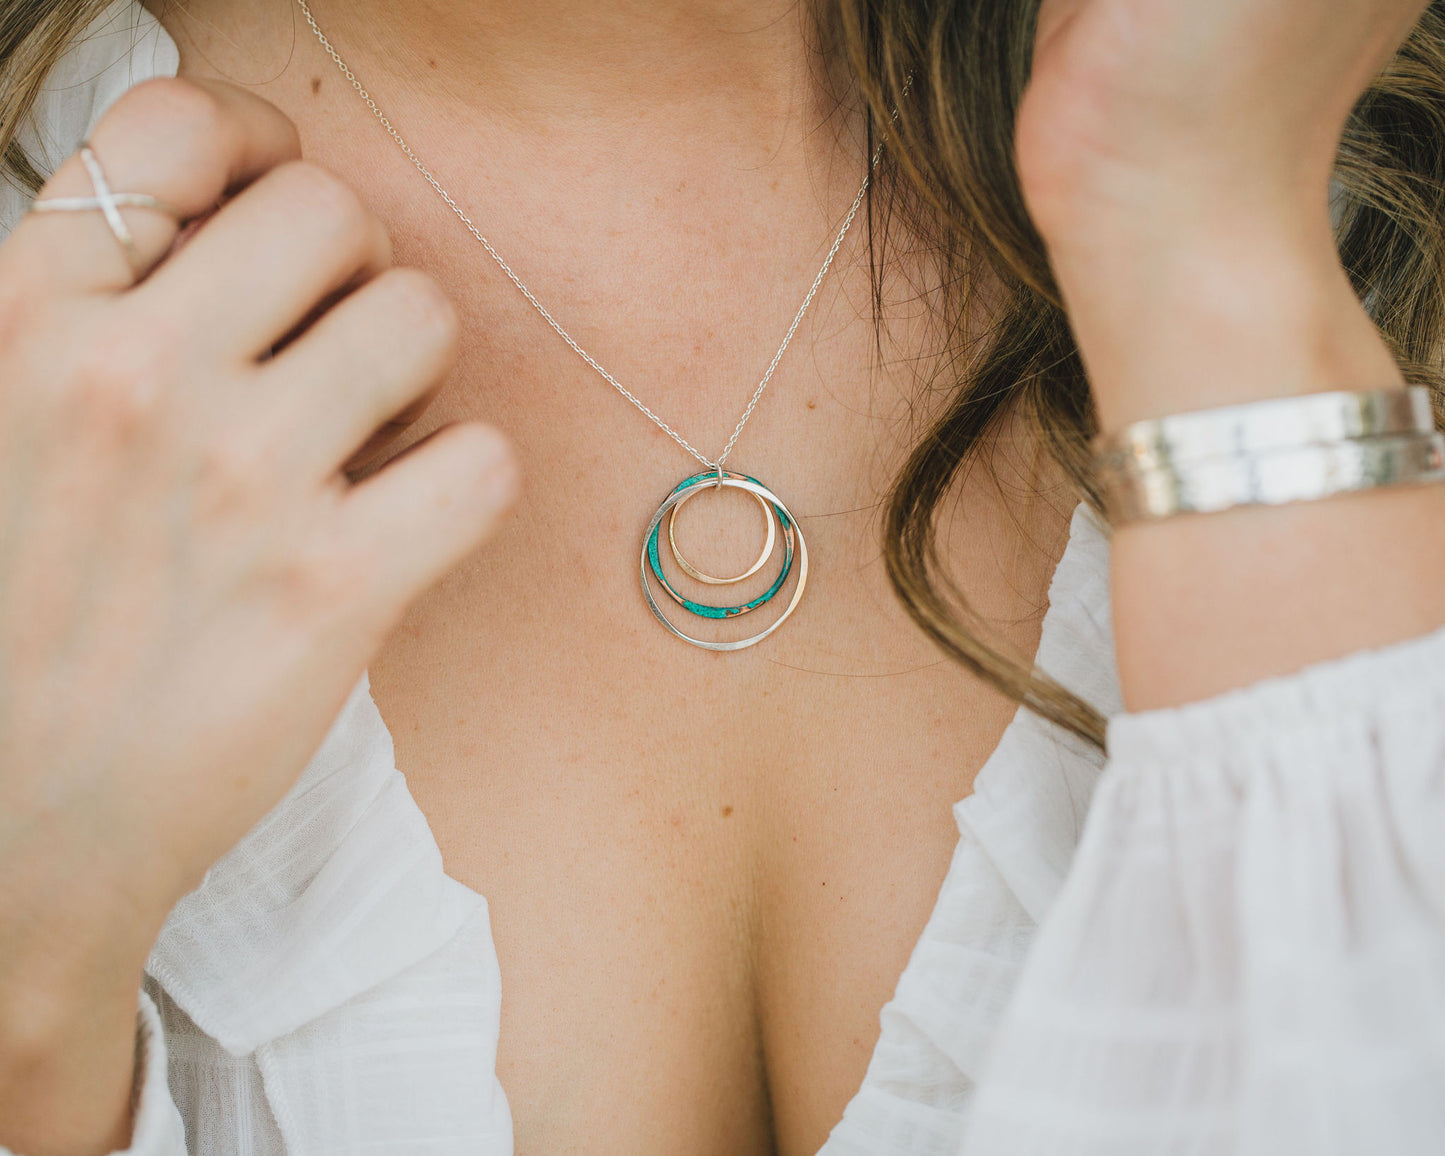 Three precious organically shaped hoops make up this design. Each is meticulously handcrafted. The largest 925 Sterling Silver hoop measures 1 inch. Mint patina over Copper and 14 Karat Gold Filled hoops gleam within. Shown here close up on our model